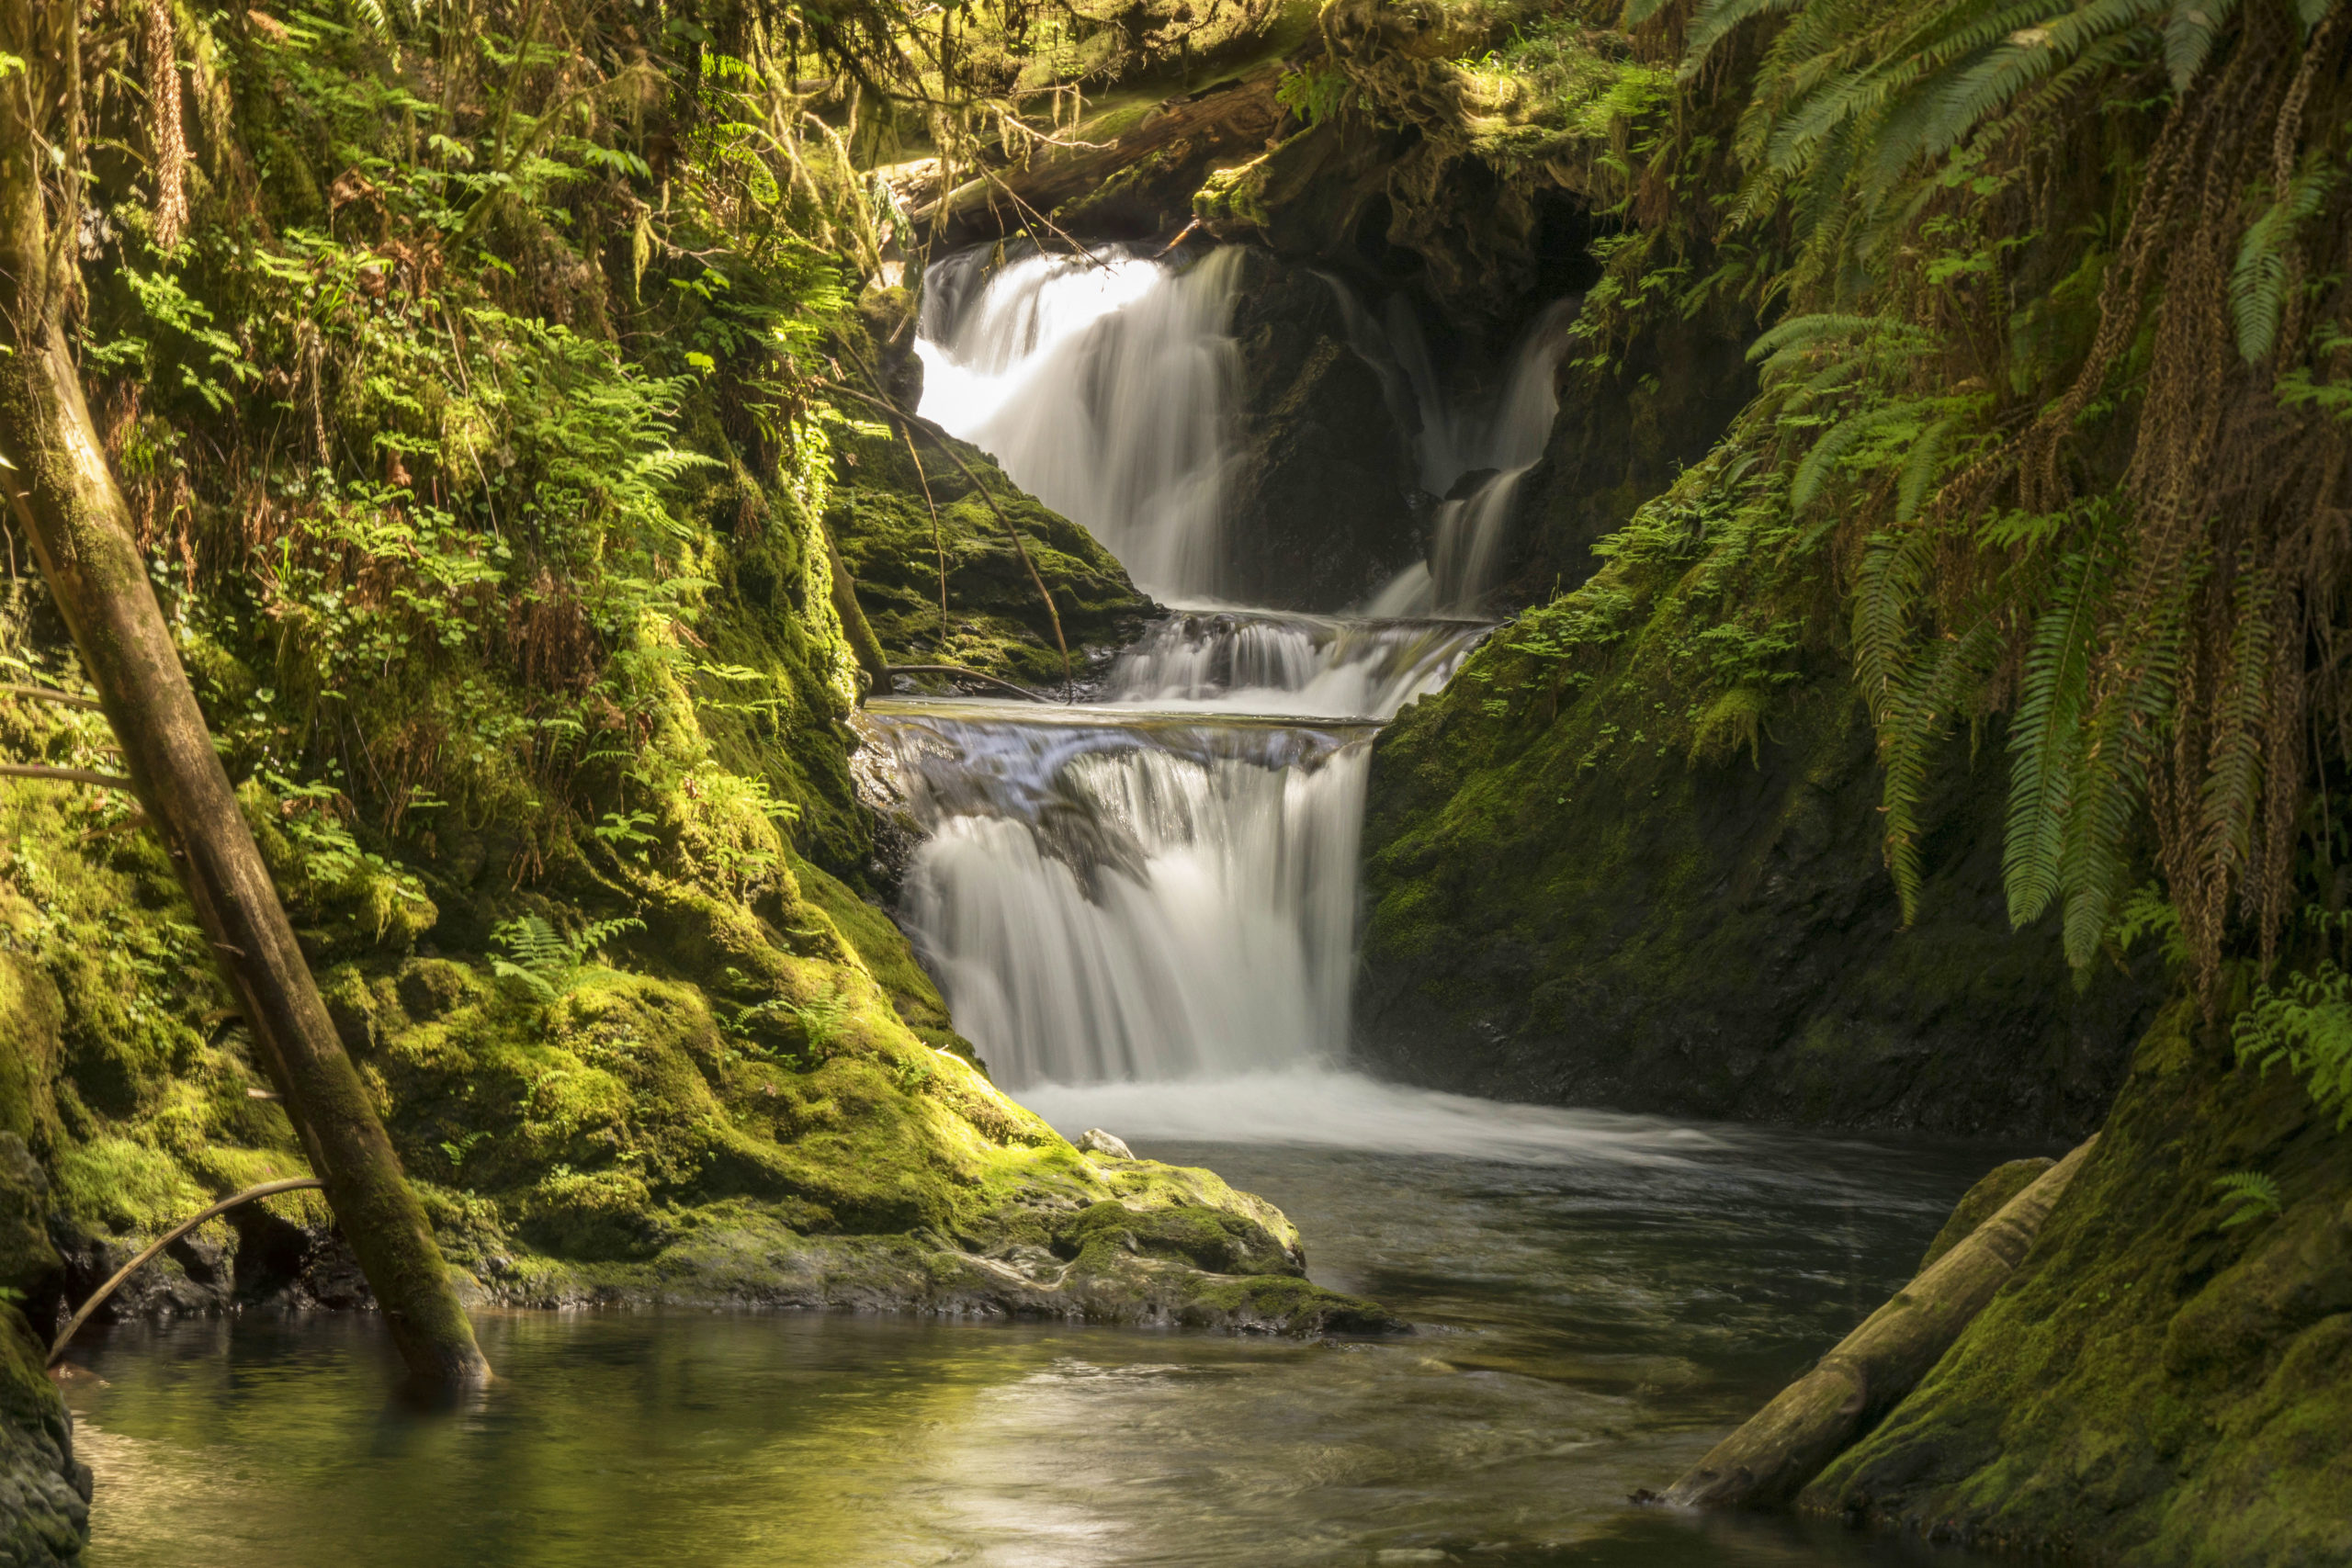 https://olympicpeninsula.org/wp-content/uploads/2021/02/WF-Trail-Willaby-Creek-Falls-3-Edited-scaled.jpg